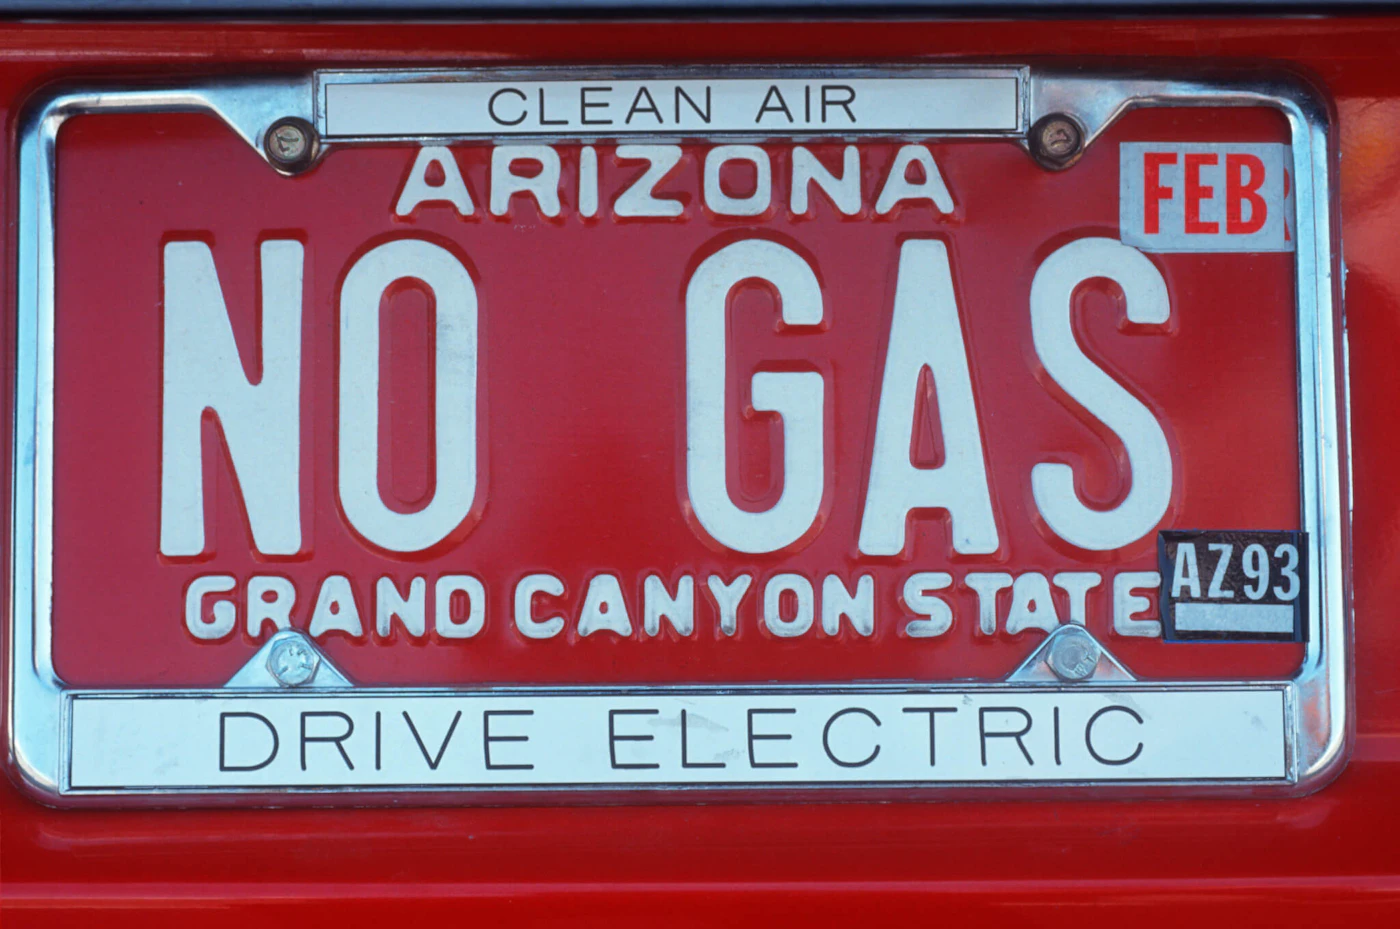 Vanity License Plate - Arizona (Photo by: Joe Sohm/Visions of America/Universal Images Group via Getty Images)